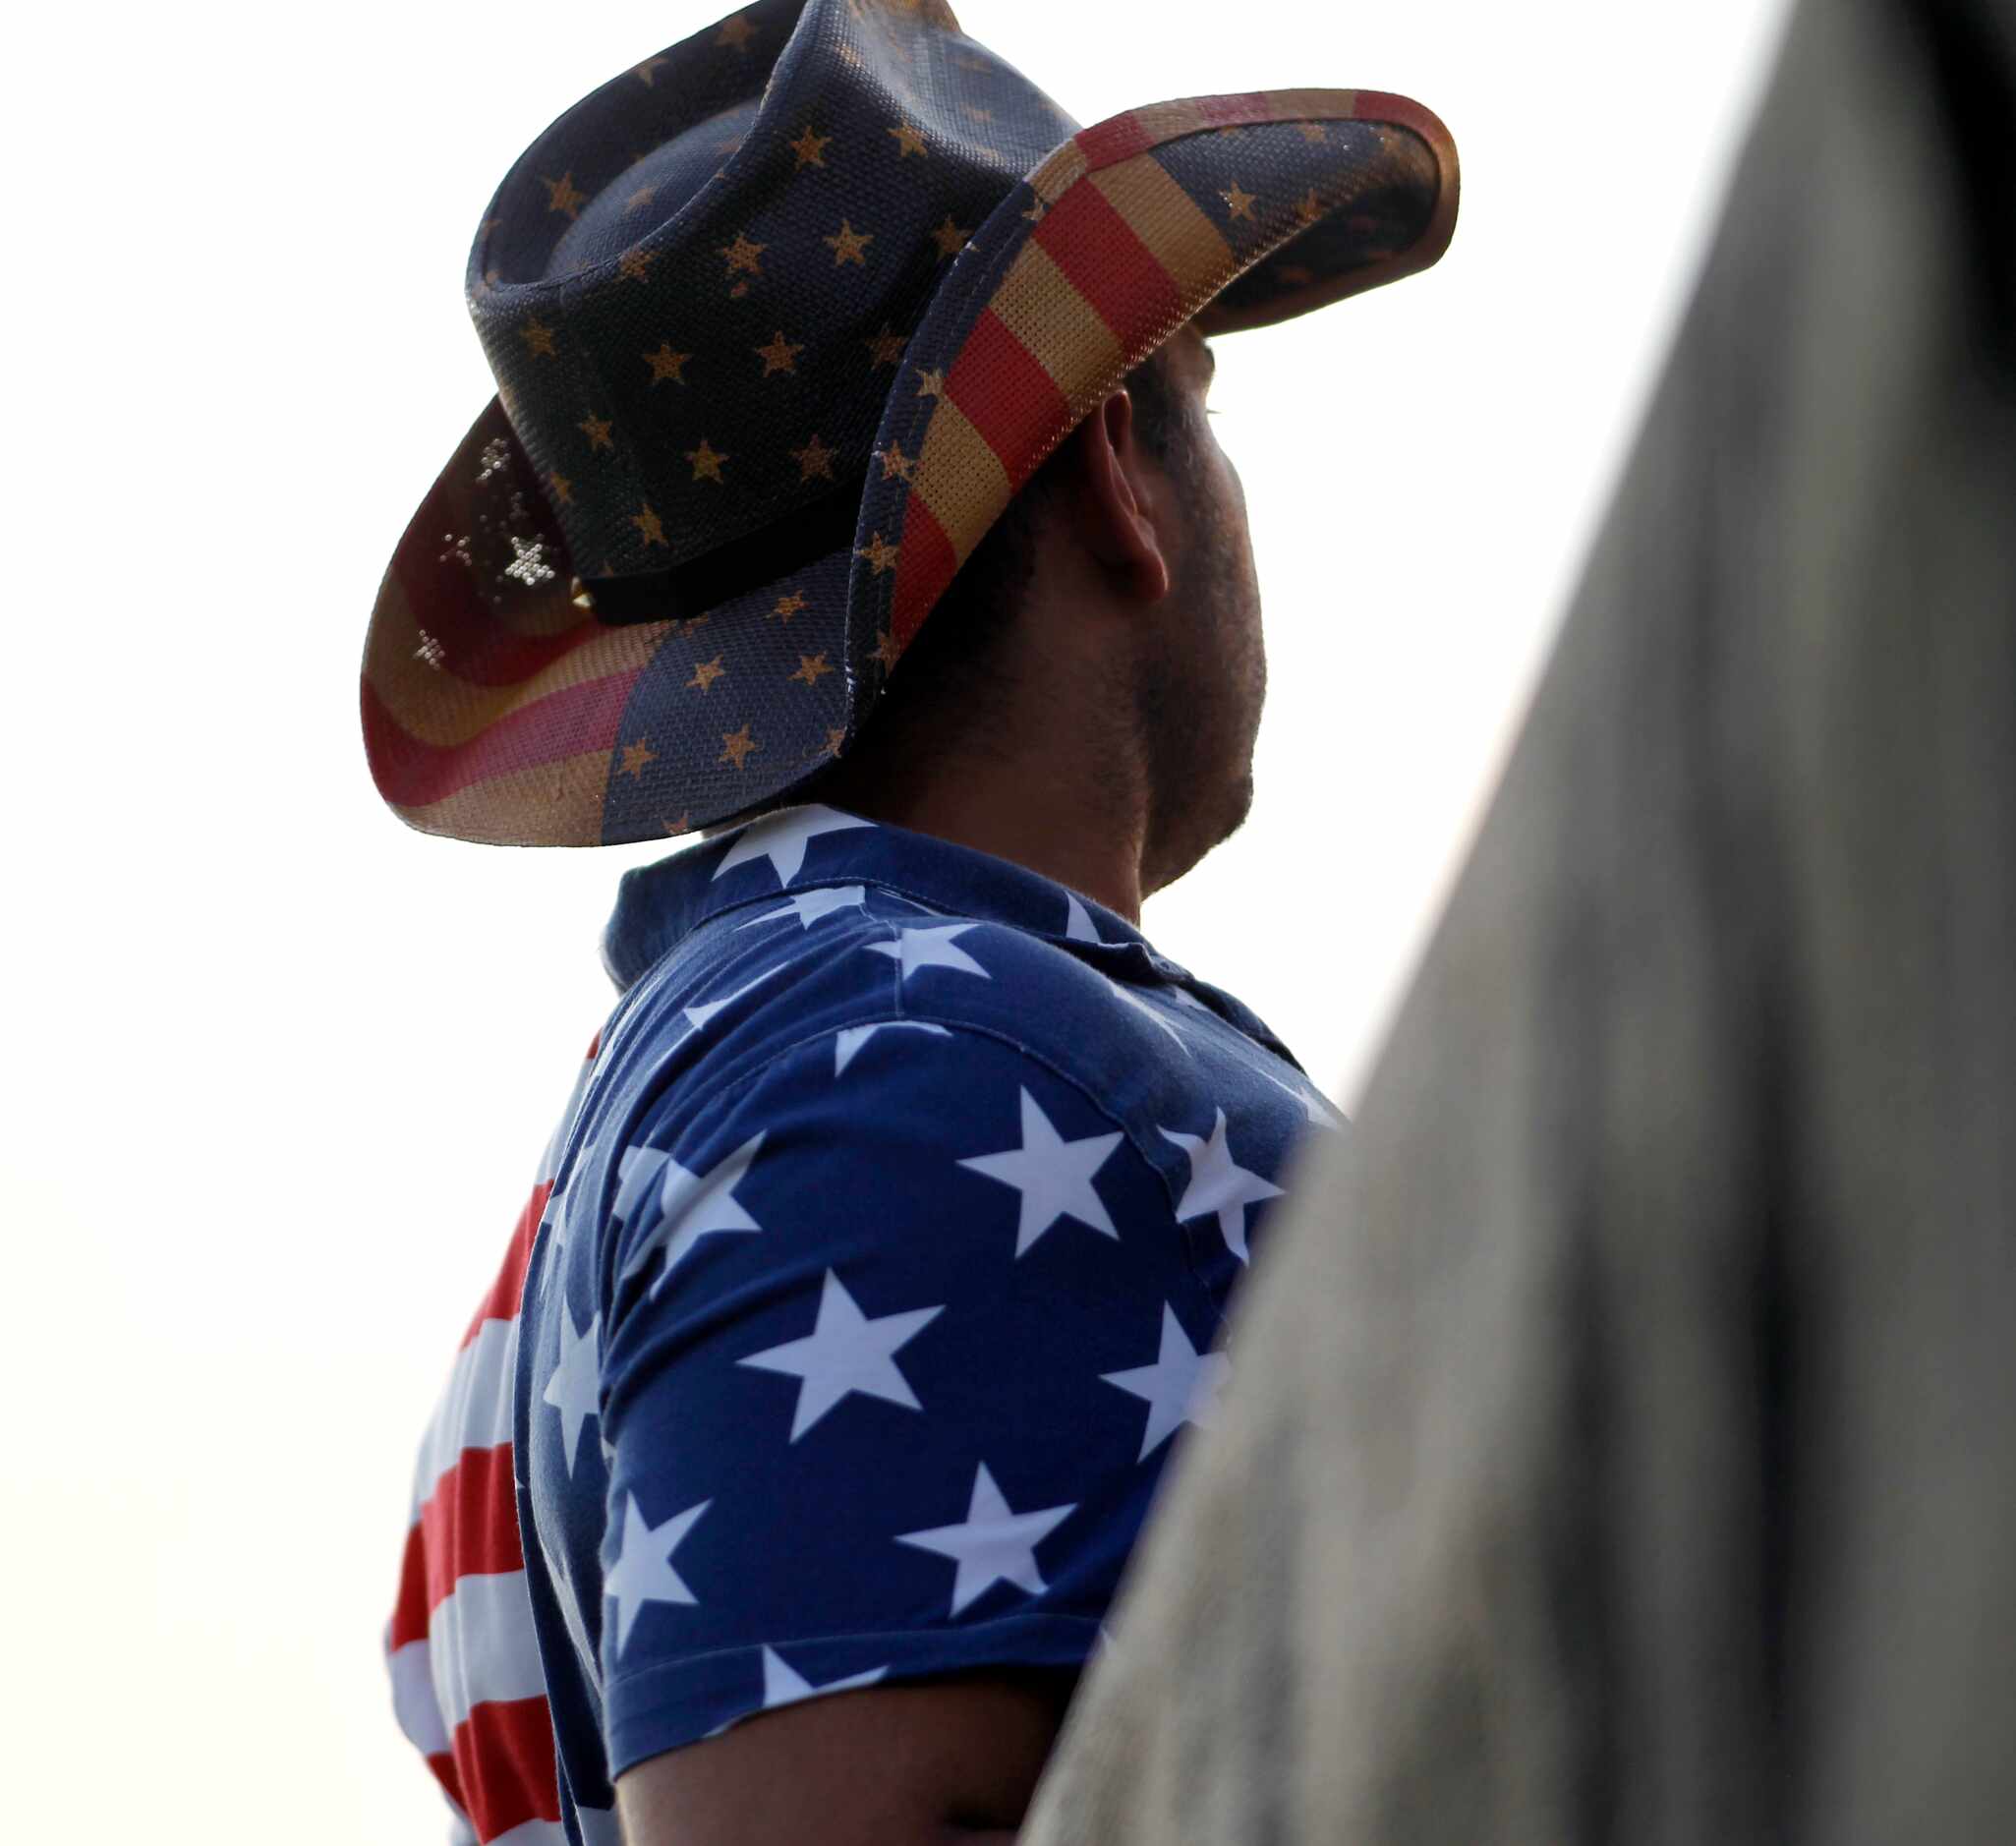 A Washington Freedom fan looks on from the stands during their cricket match against the San...